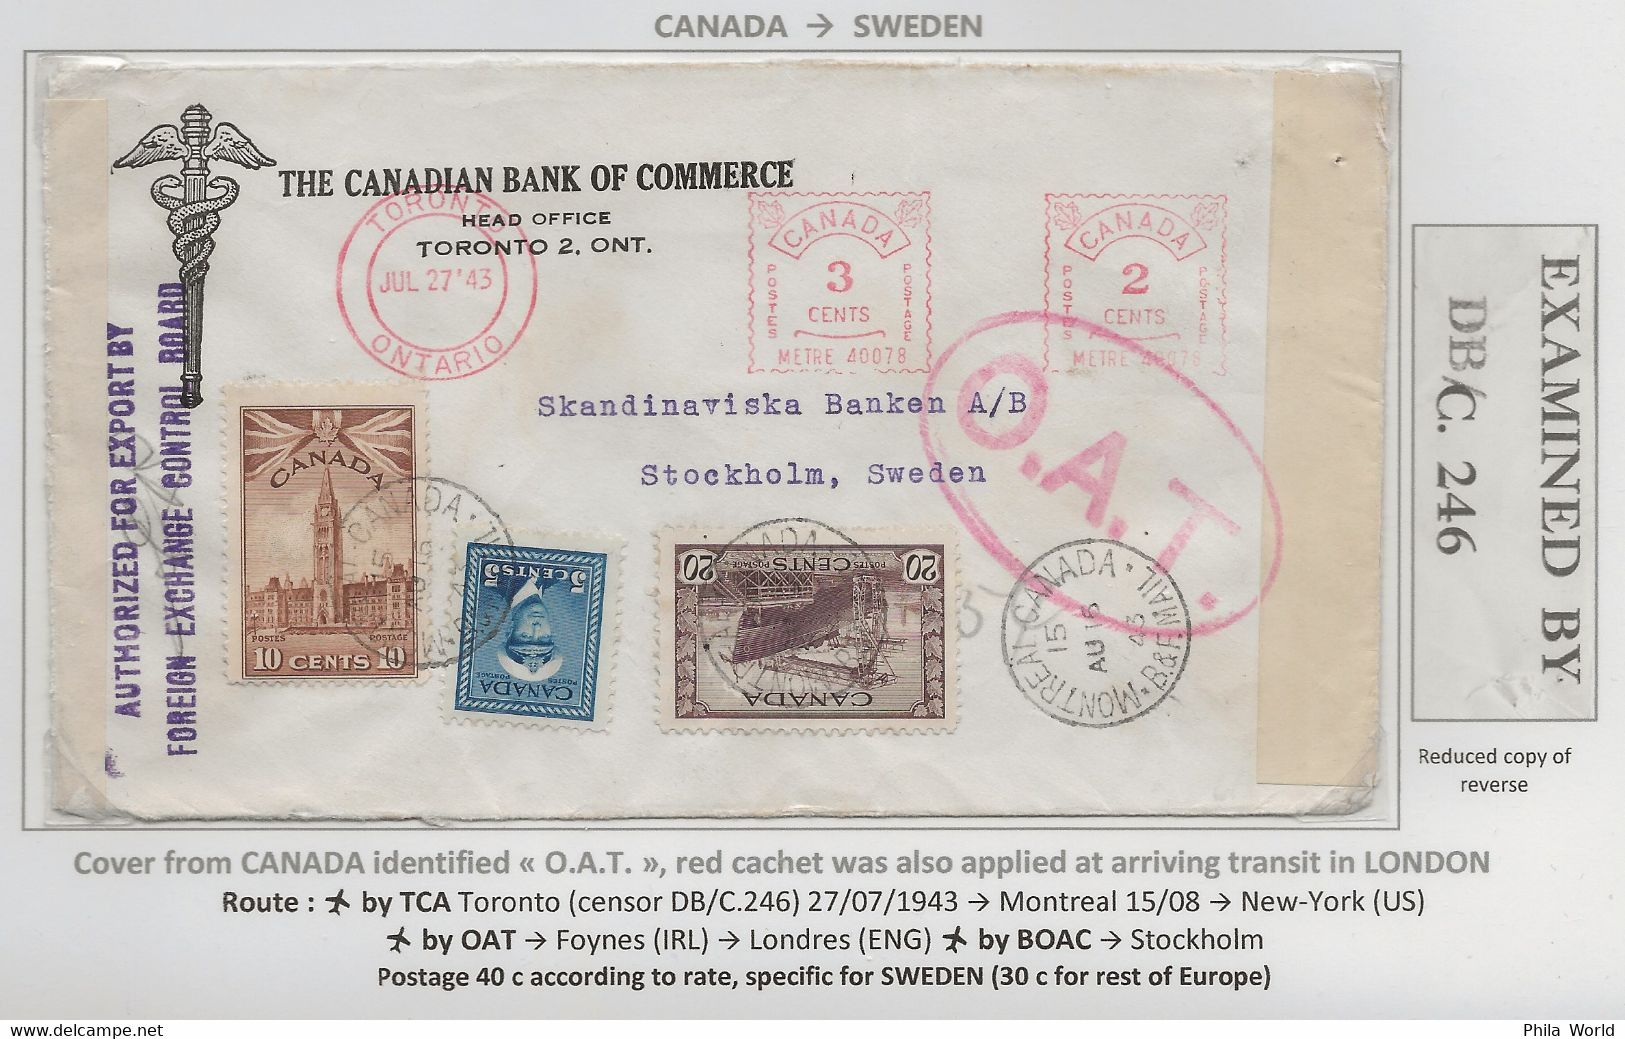 OAT 1943 CANADA Meter Postage EMA Air Mail Cover > SWEDEN US Censor EXAMINED DB/C 246 Censortape From TORONTO - Briefe U. Dokumente